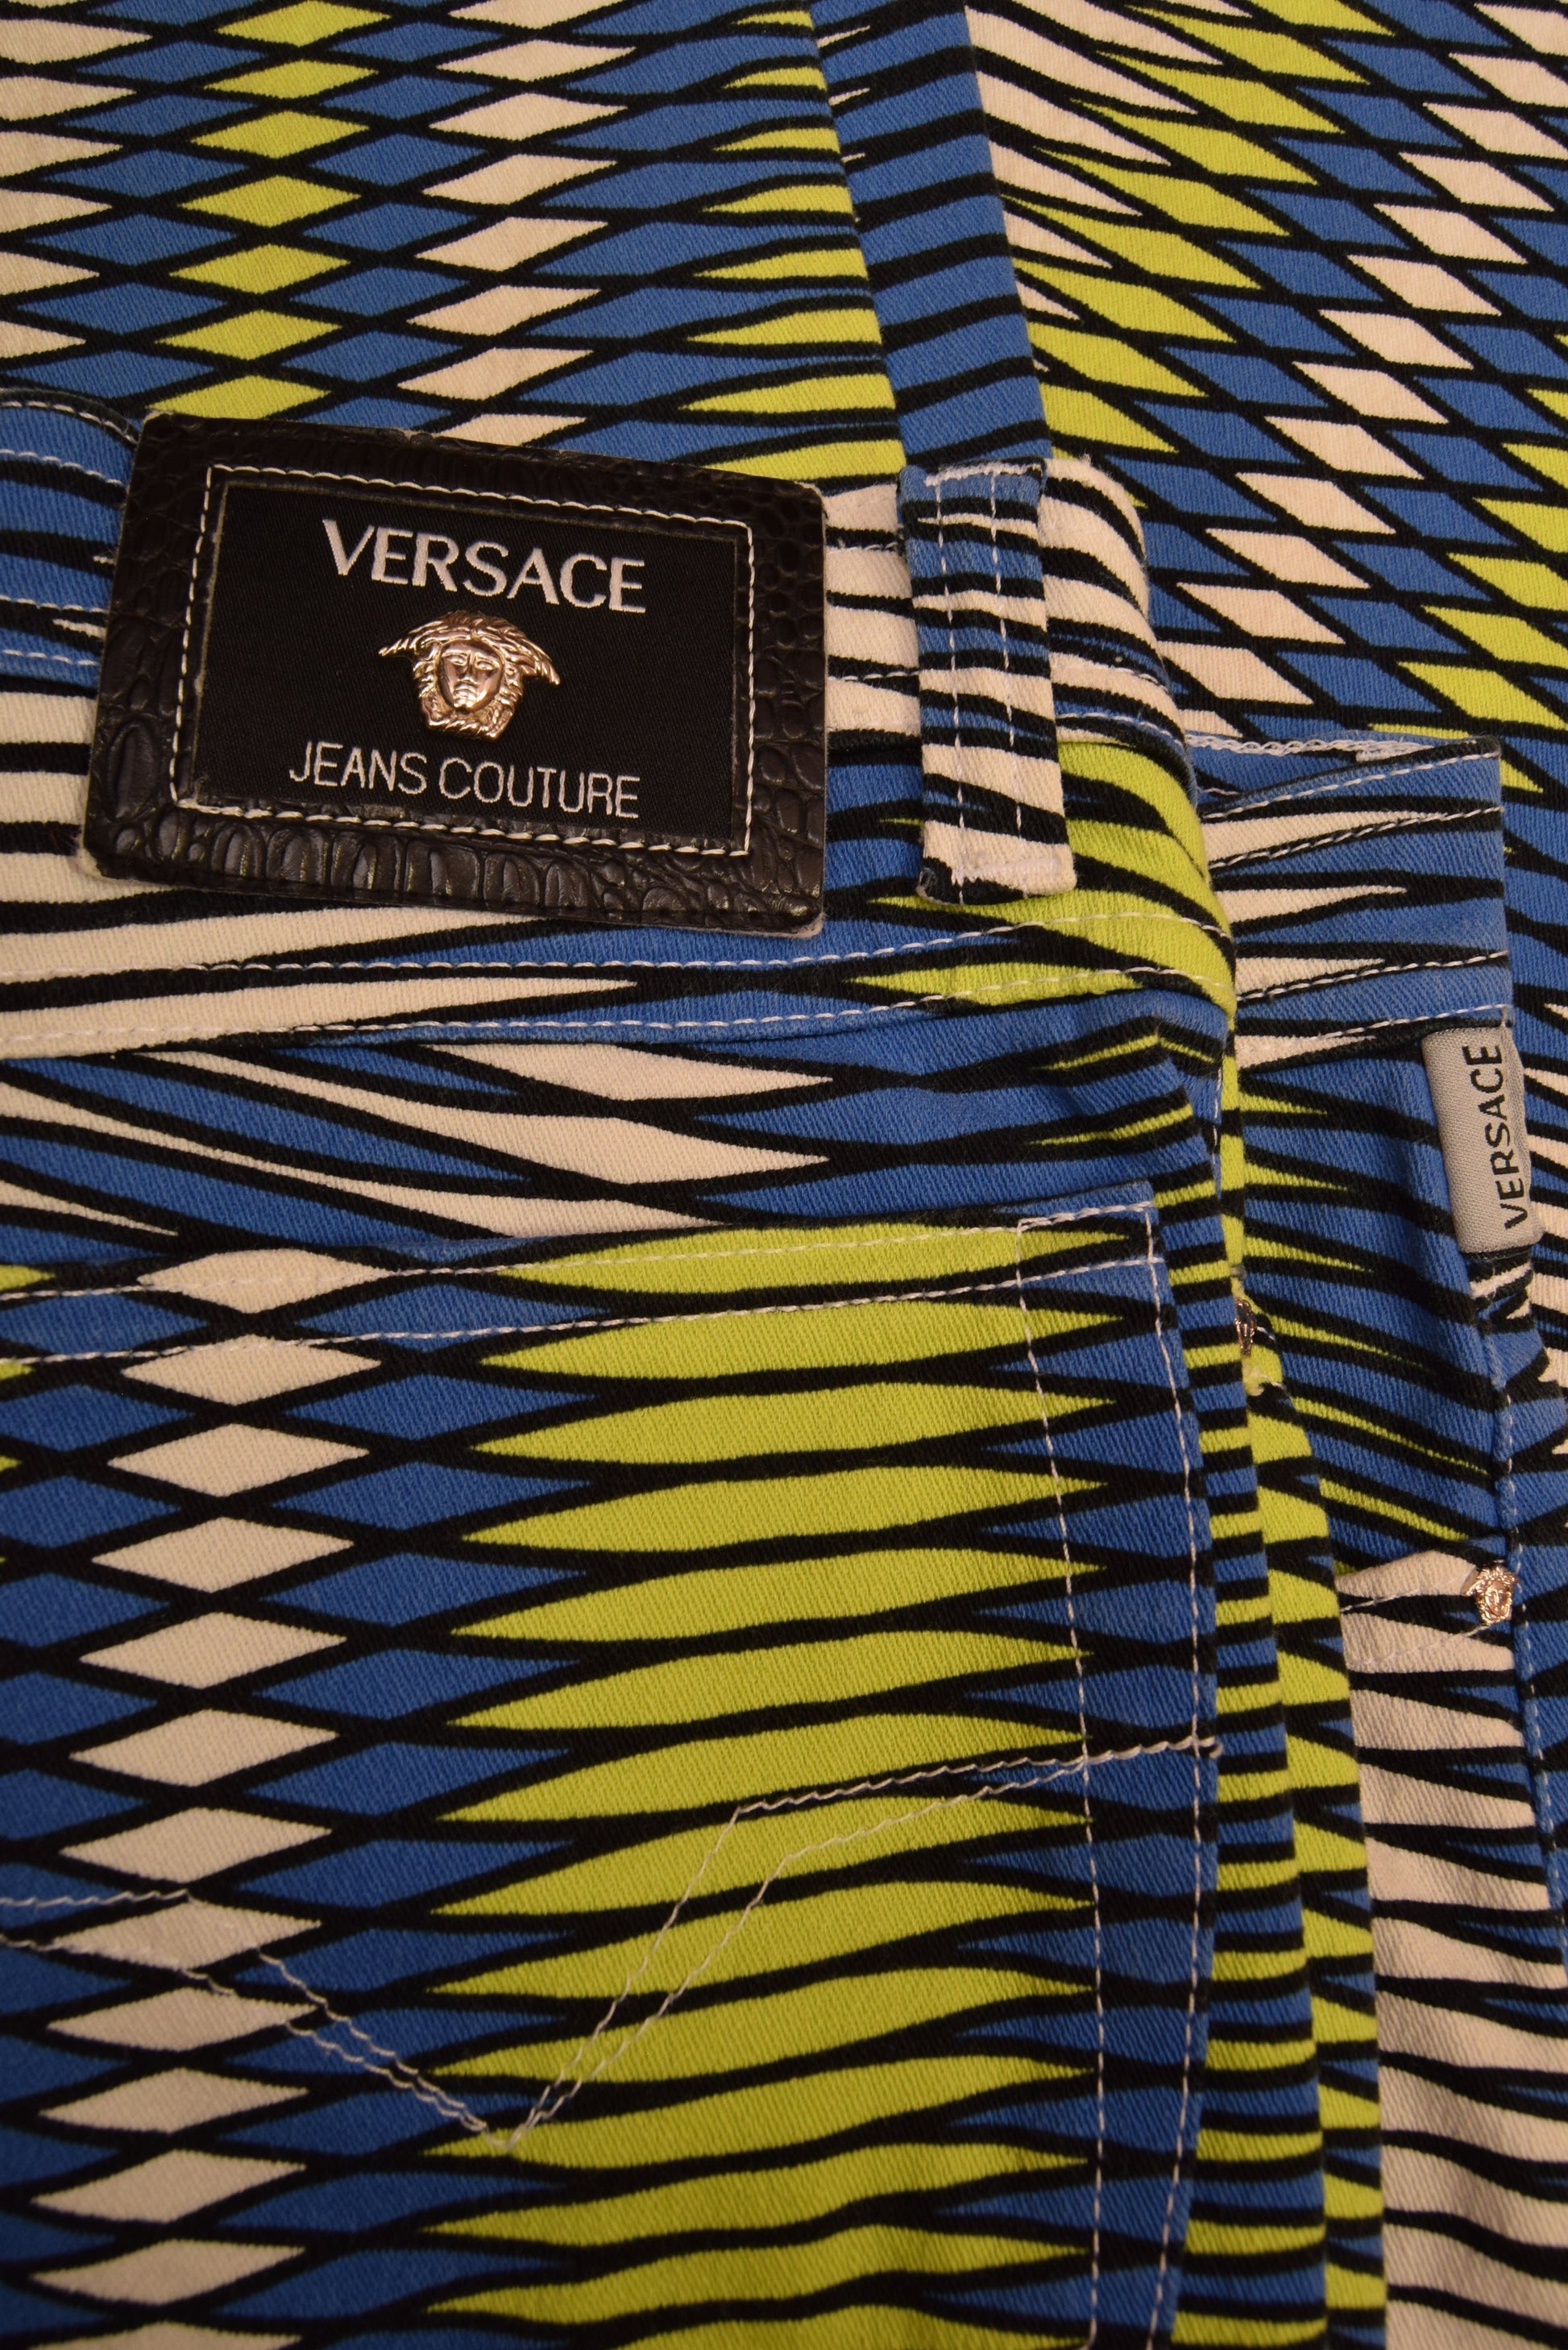 90's Versace Jeans Couture Opt Art Psyhadelic Geometric Stretch Made in Italy High Waist